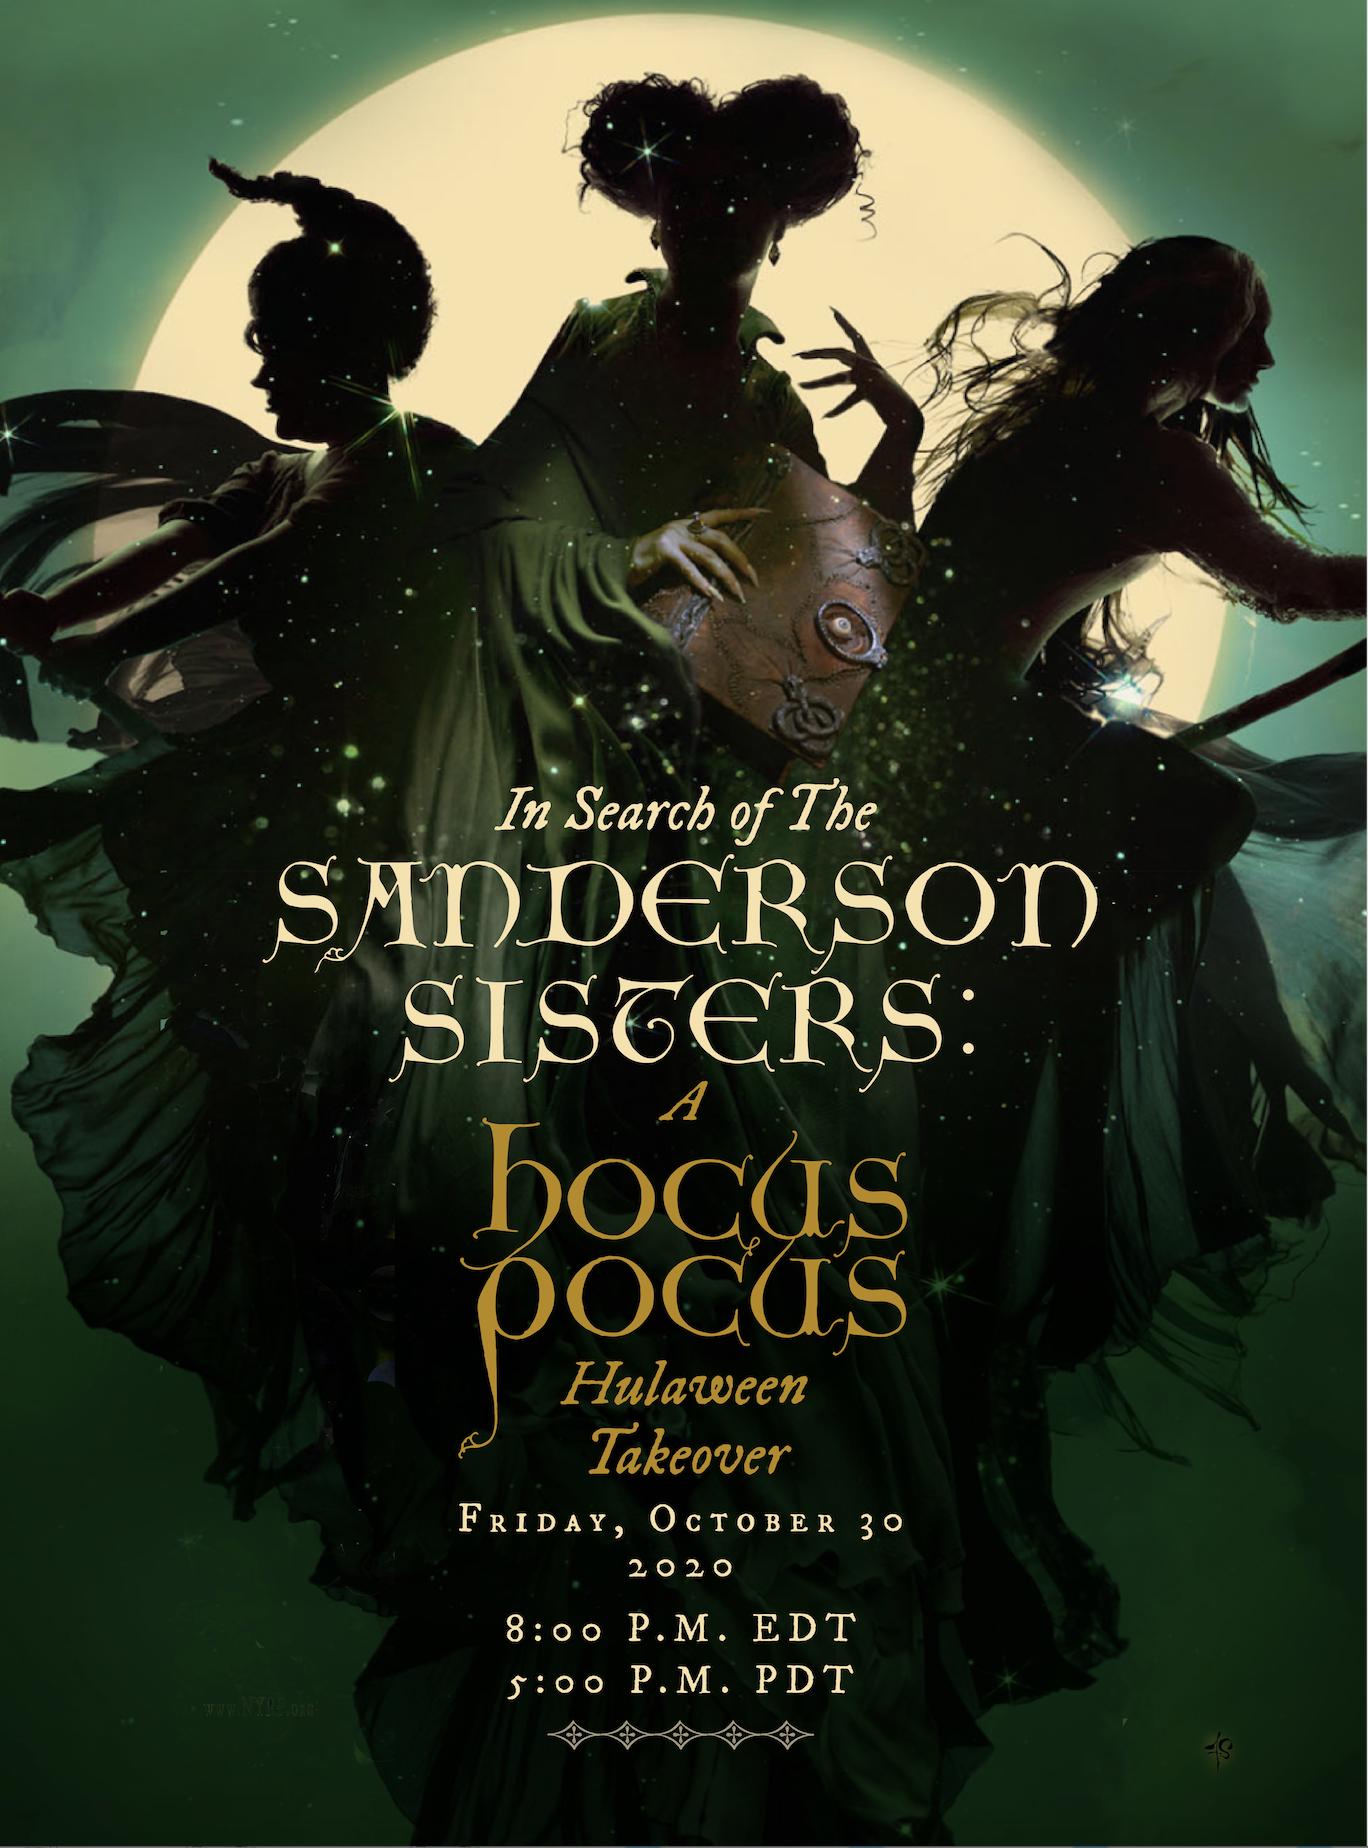 In Search of the Sanderson Sisters: A Hocus Pocus Hulaween Takeover (2020)